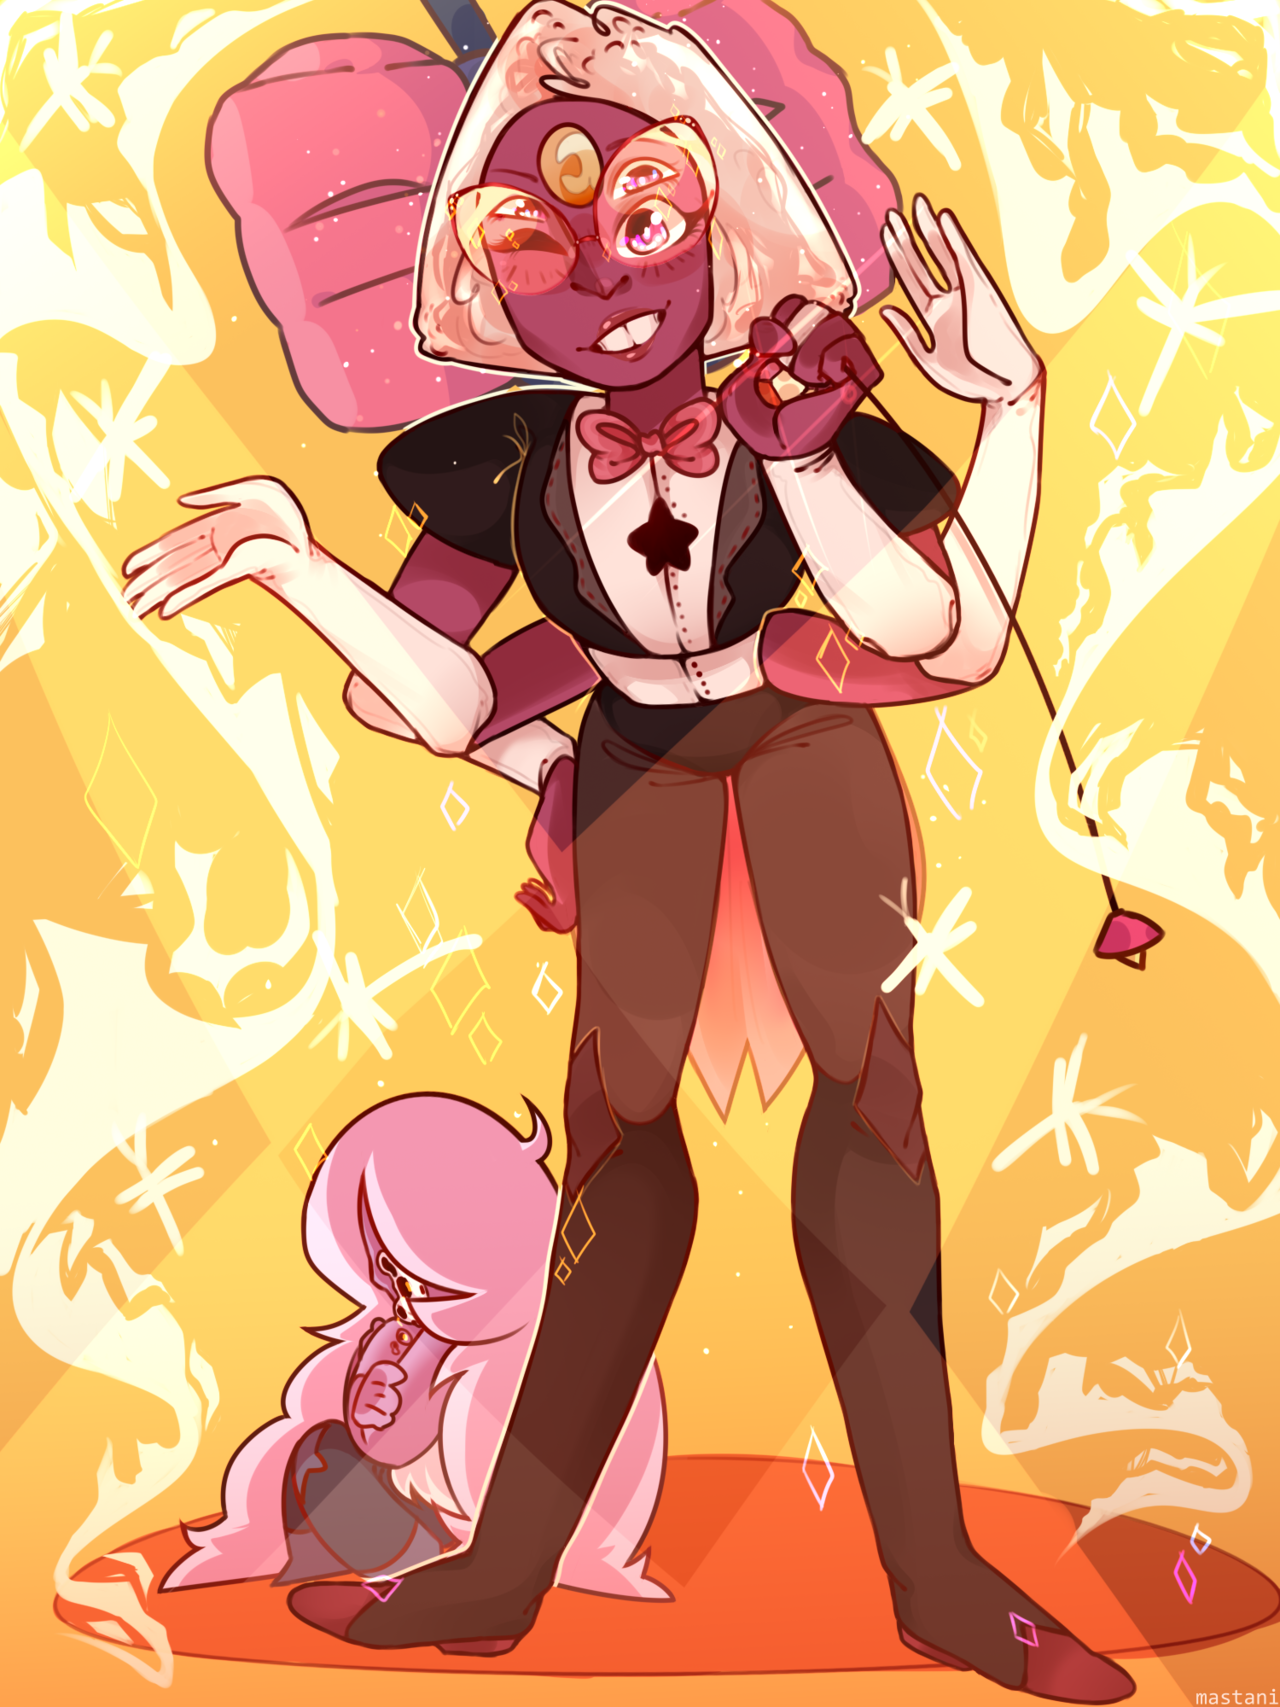 haha guess who’s alive (my tumblr don’t want to work so it doesn’t download images :(( that’s like a redraw of my really old 2016 art and it’s the third redraw of it cause i love sardonyx very much